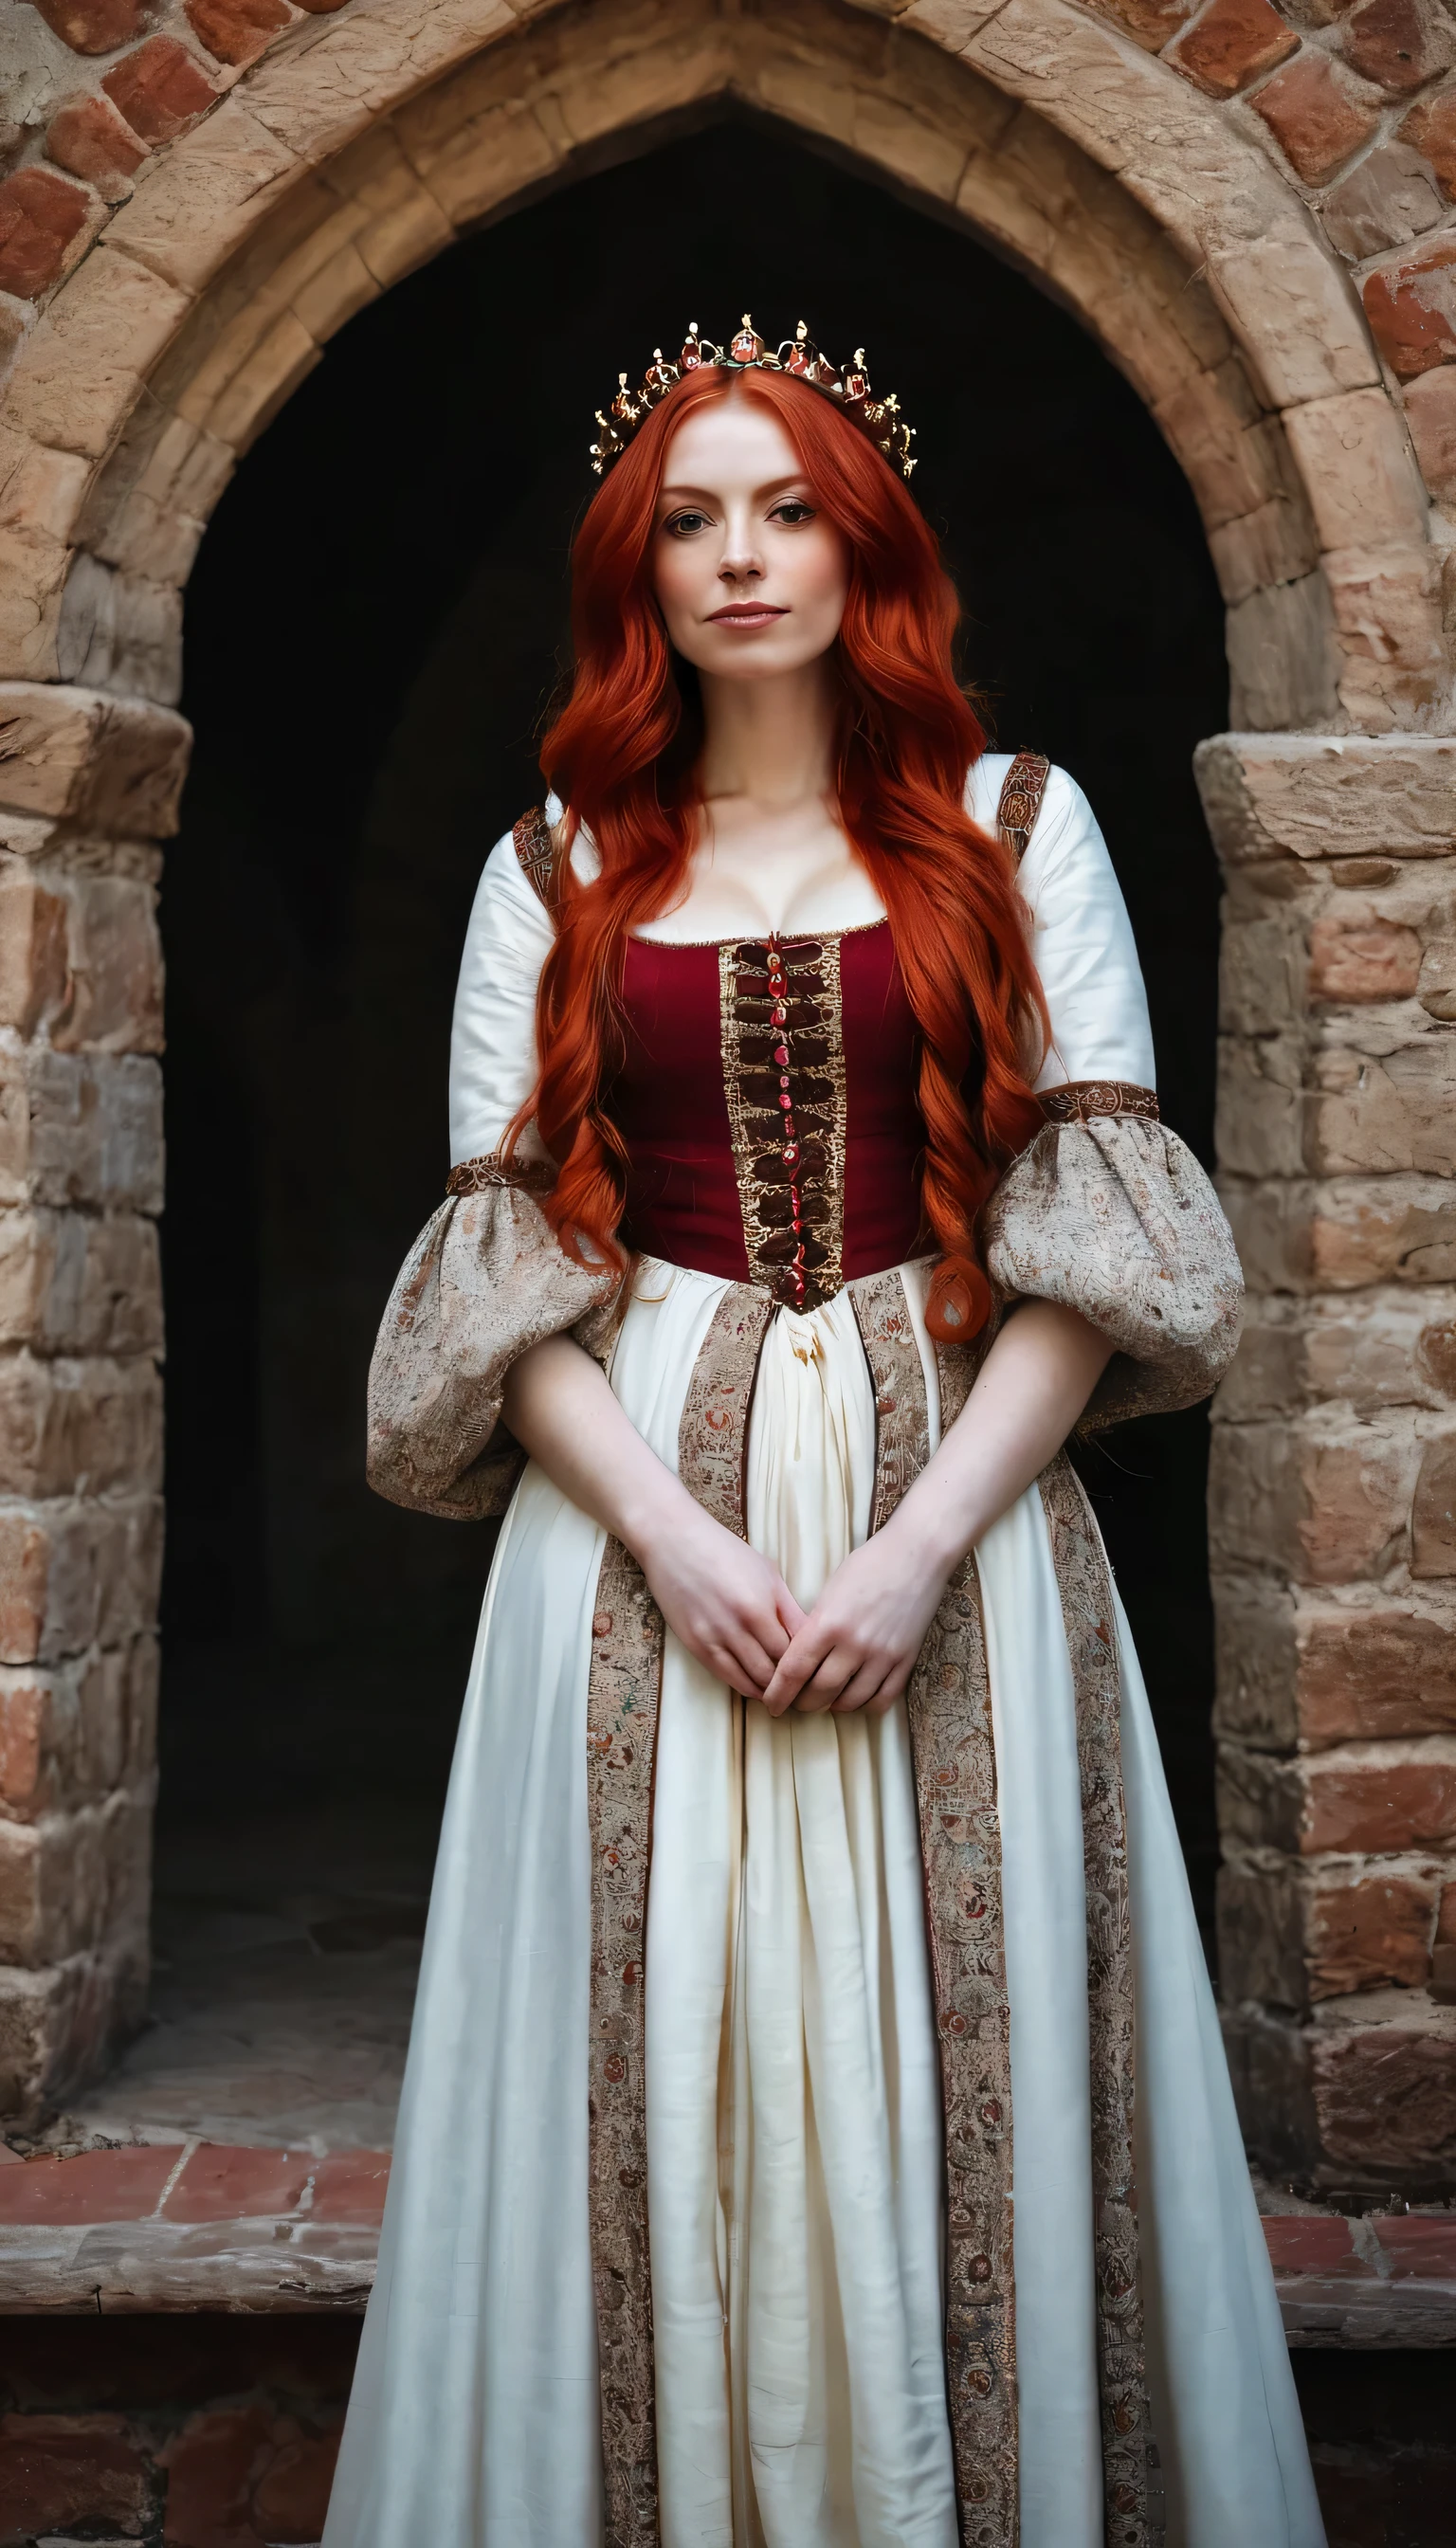 arafed woman in a medieval dress and red red hair, a photo inspired by Chica Macnab, tumblr, medieval art, medieval outfit, fashionable medieval countess, medieval clothes, medieval cathedral, gold trims, medieval chic, medieval girl, medieval regal, medieval maiden, in a medieval style, medieval regal, medieval dress